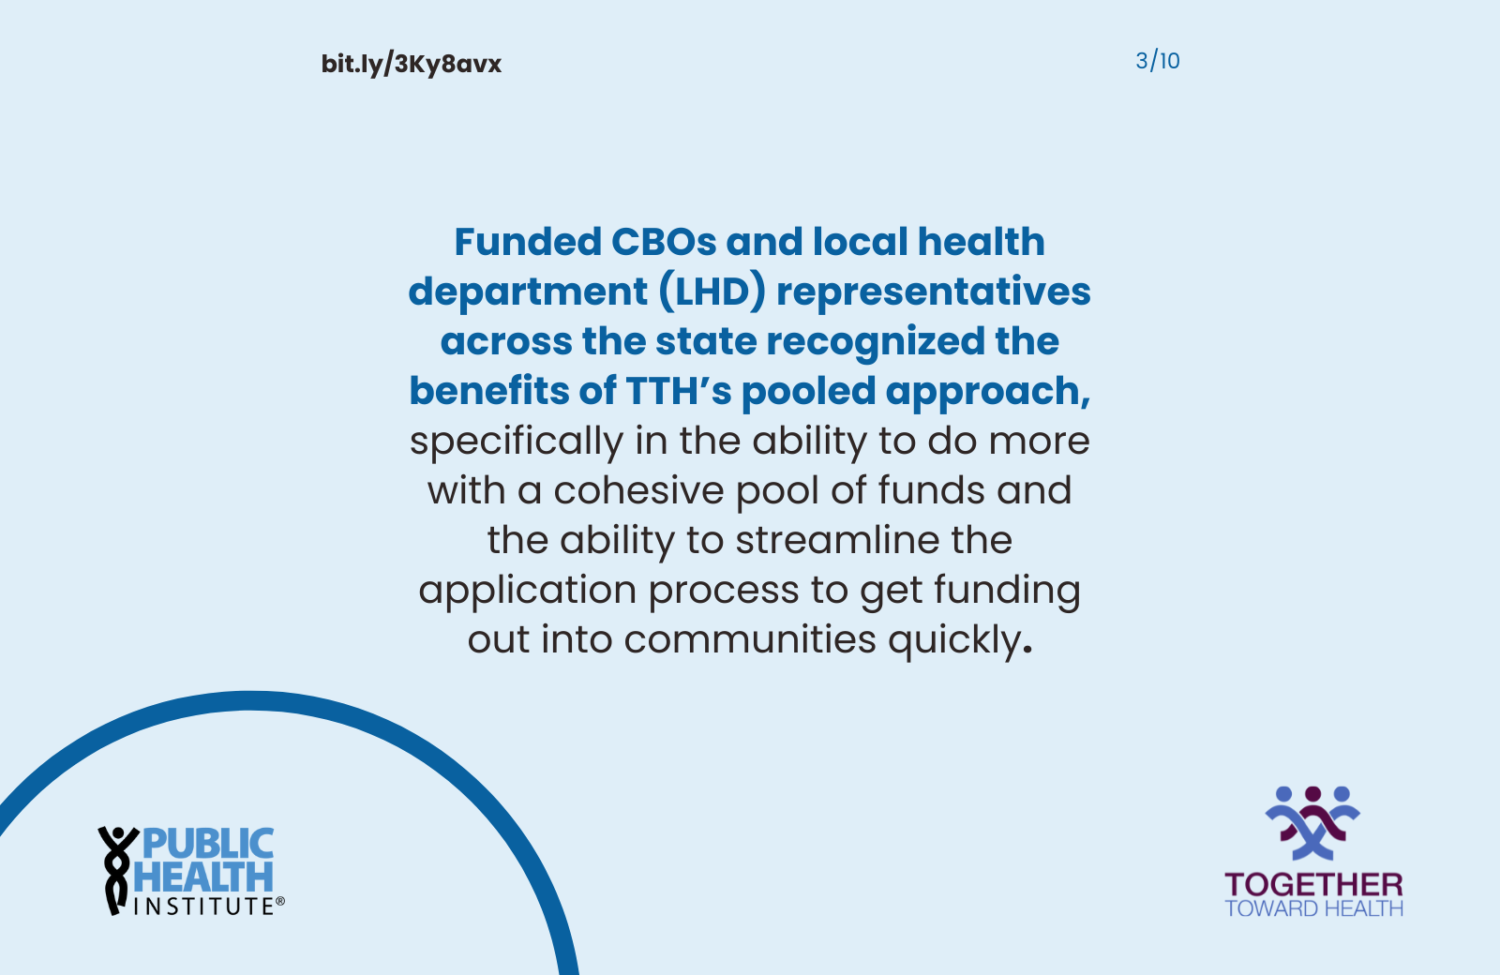 Funded CBOs and local health department (LHD) representatives across the state recognized the benefits of TTH’s pooled approach, specifically in the ability to do more with a cohesive pool of funds and the ability to streamline the application process to get funding out into communities quickly.